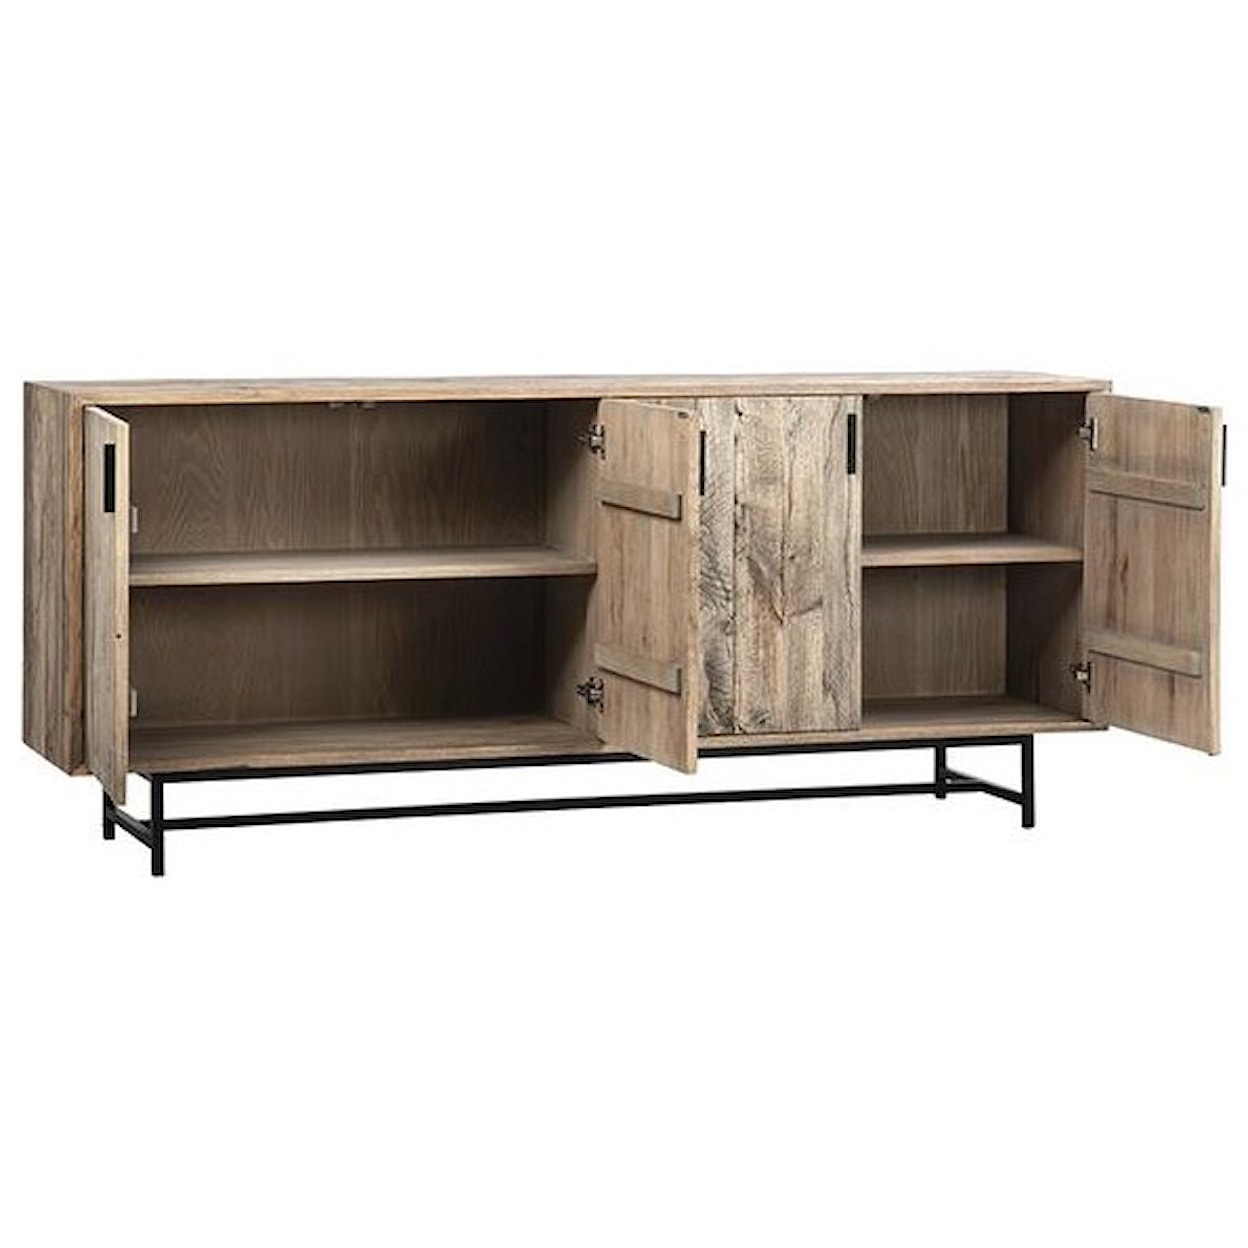 Dovetail Furniture Sideboards/Buffets Larson Sideboard